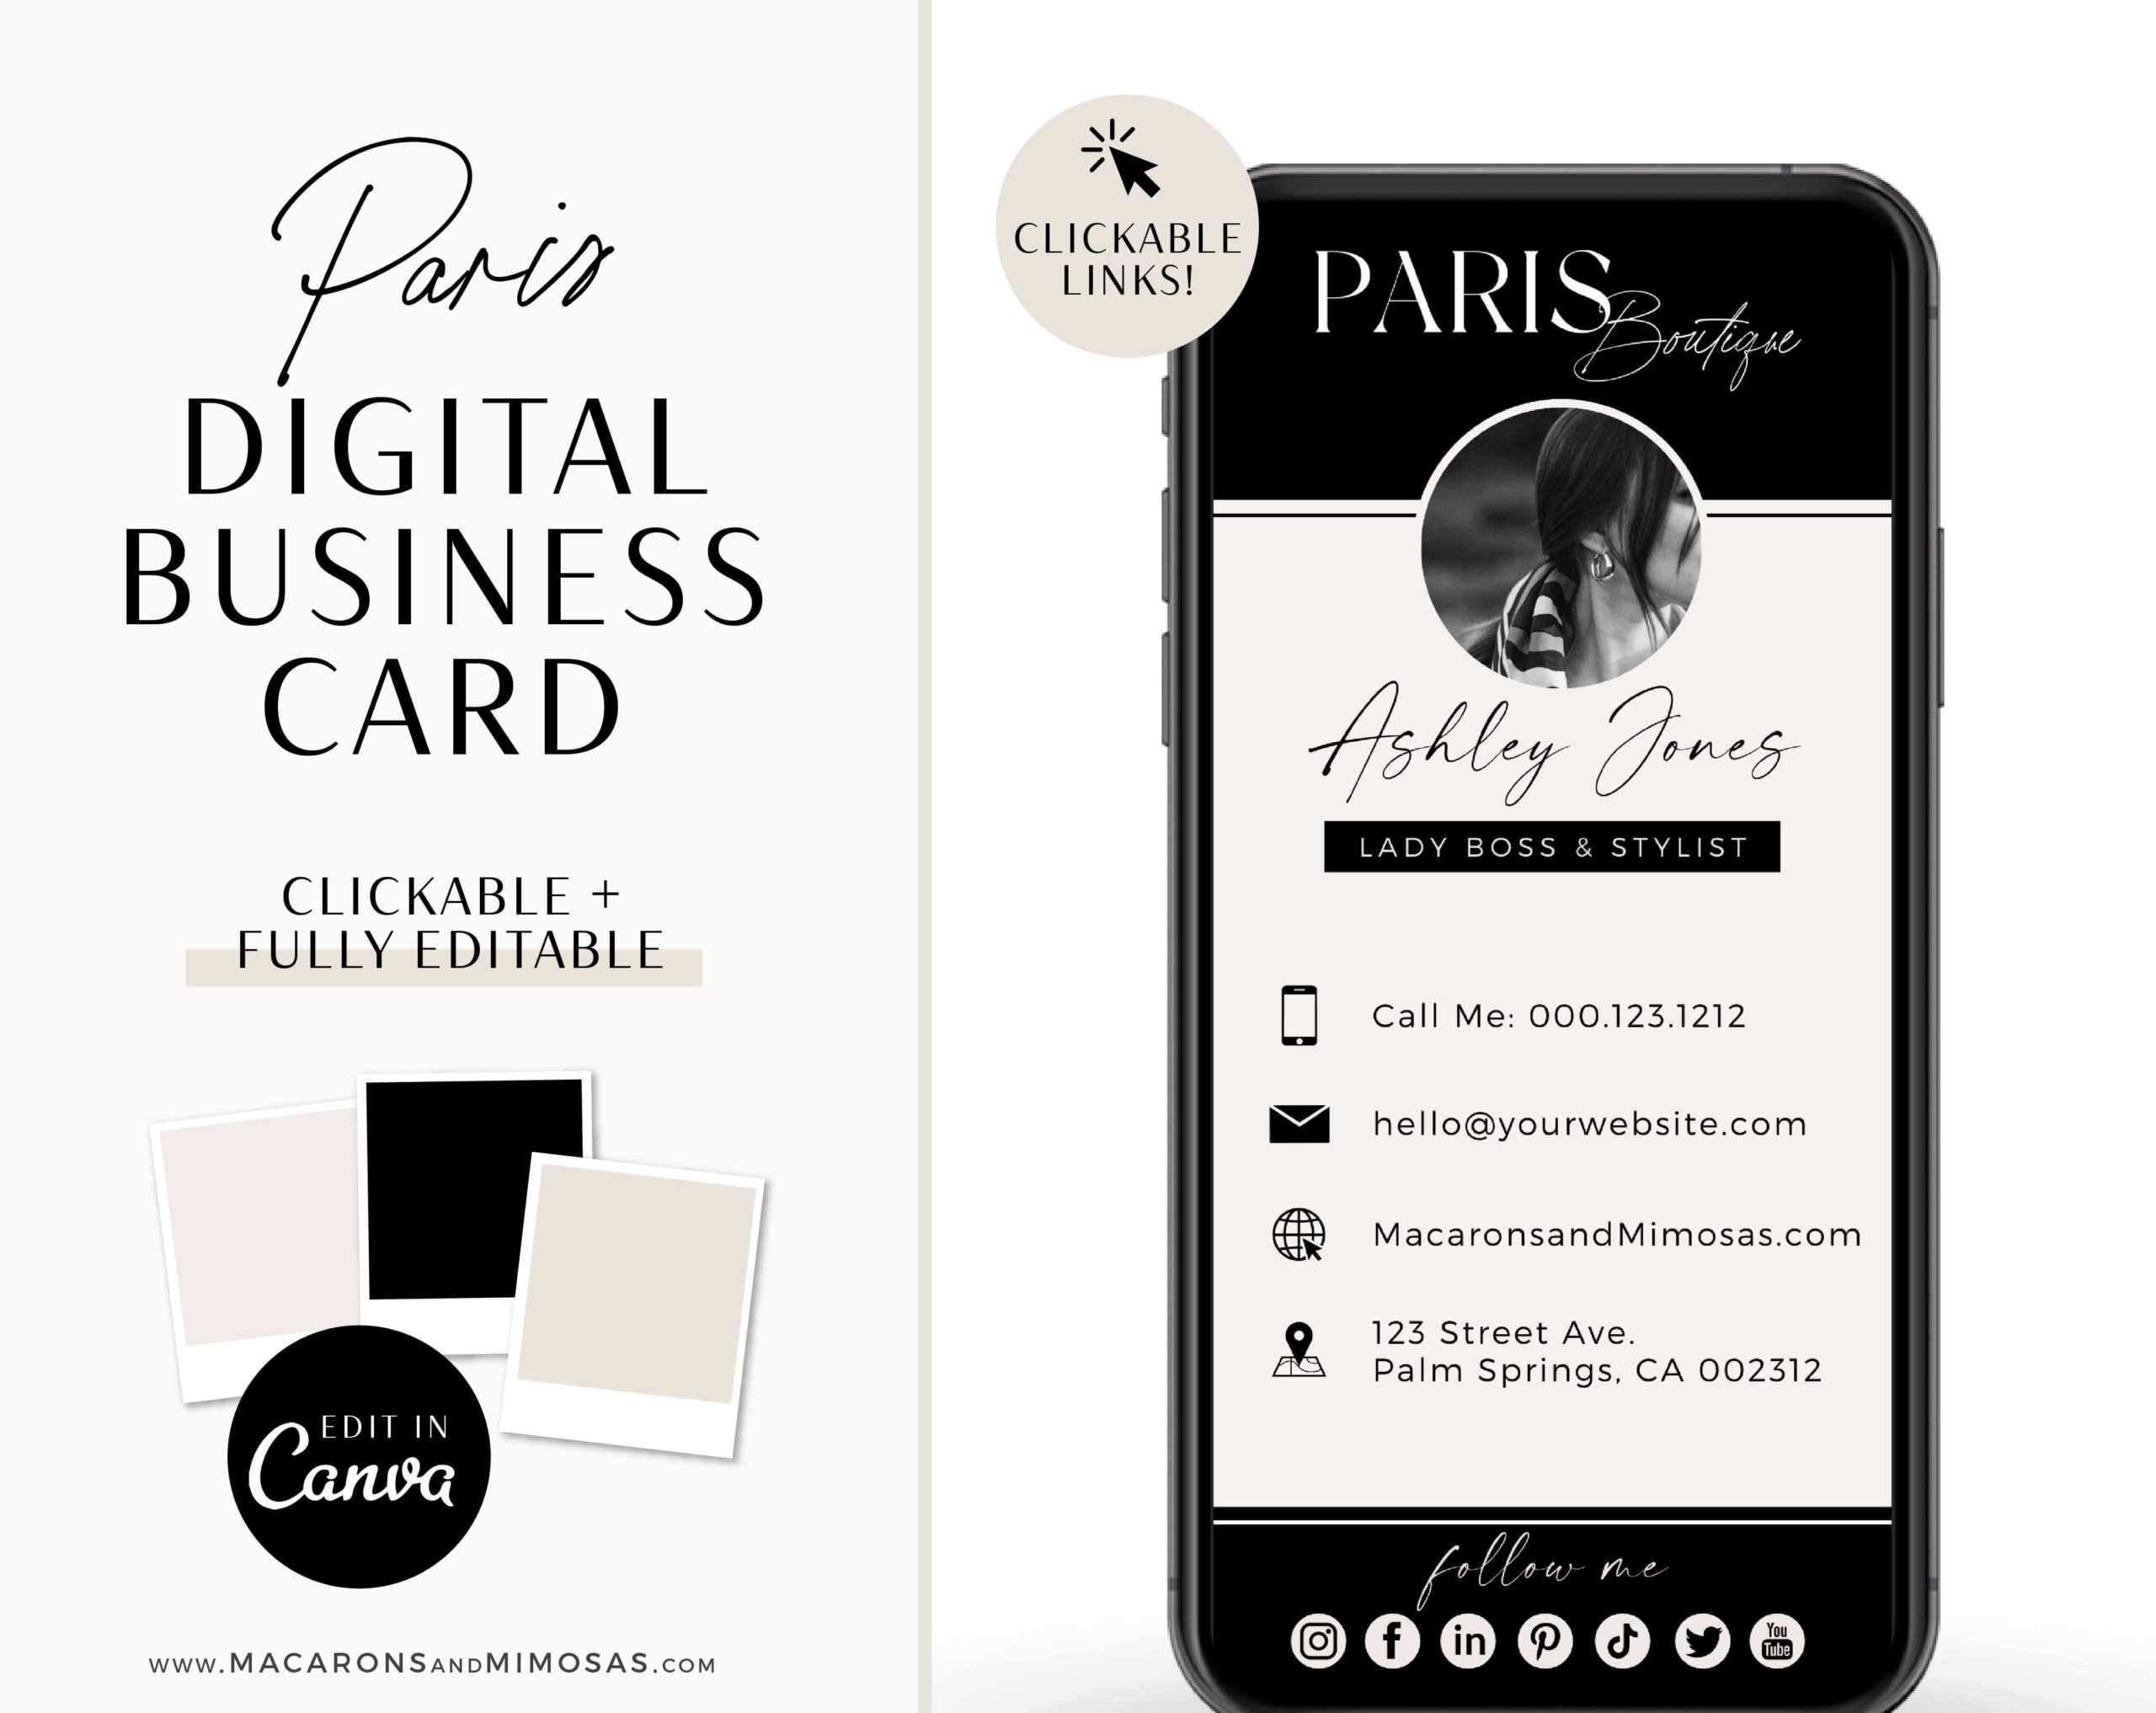 Modern digital business card template with clickable links, How to create DIY Modern Minimalist Blush Black Real Estate Digital Business Card